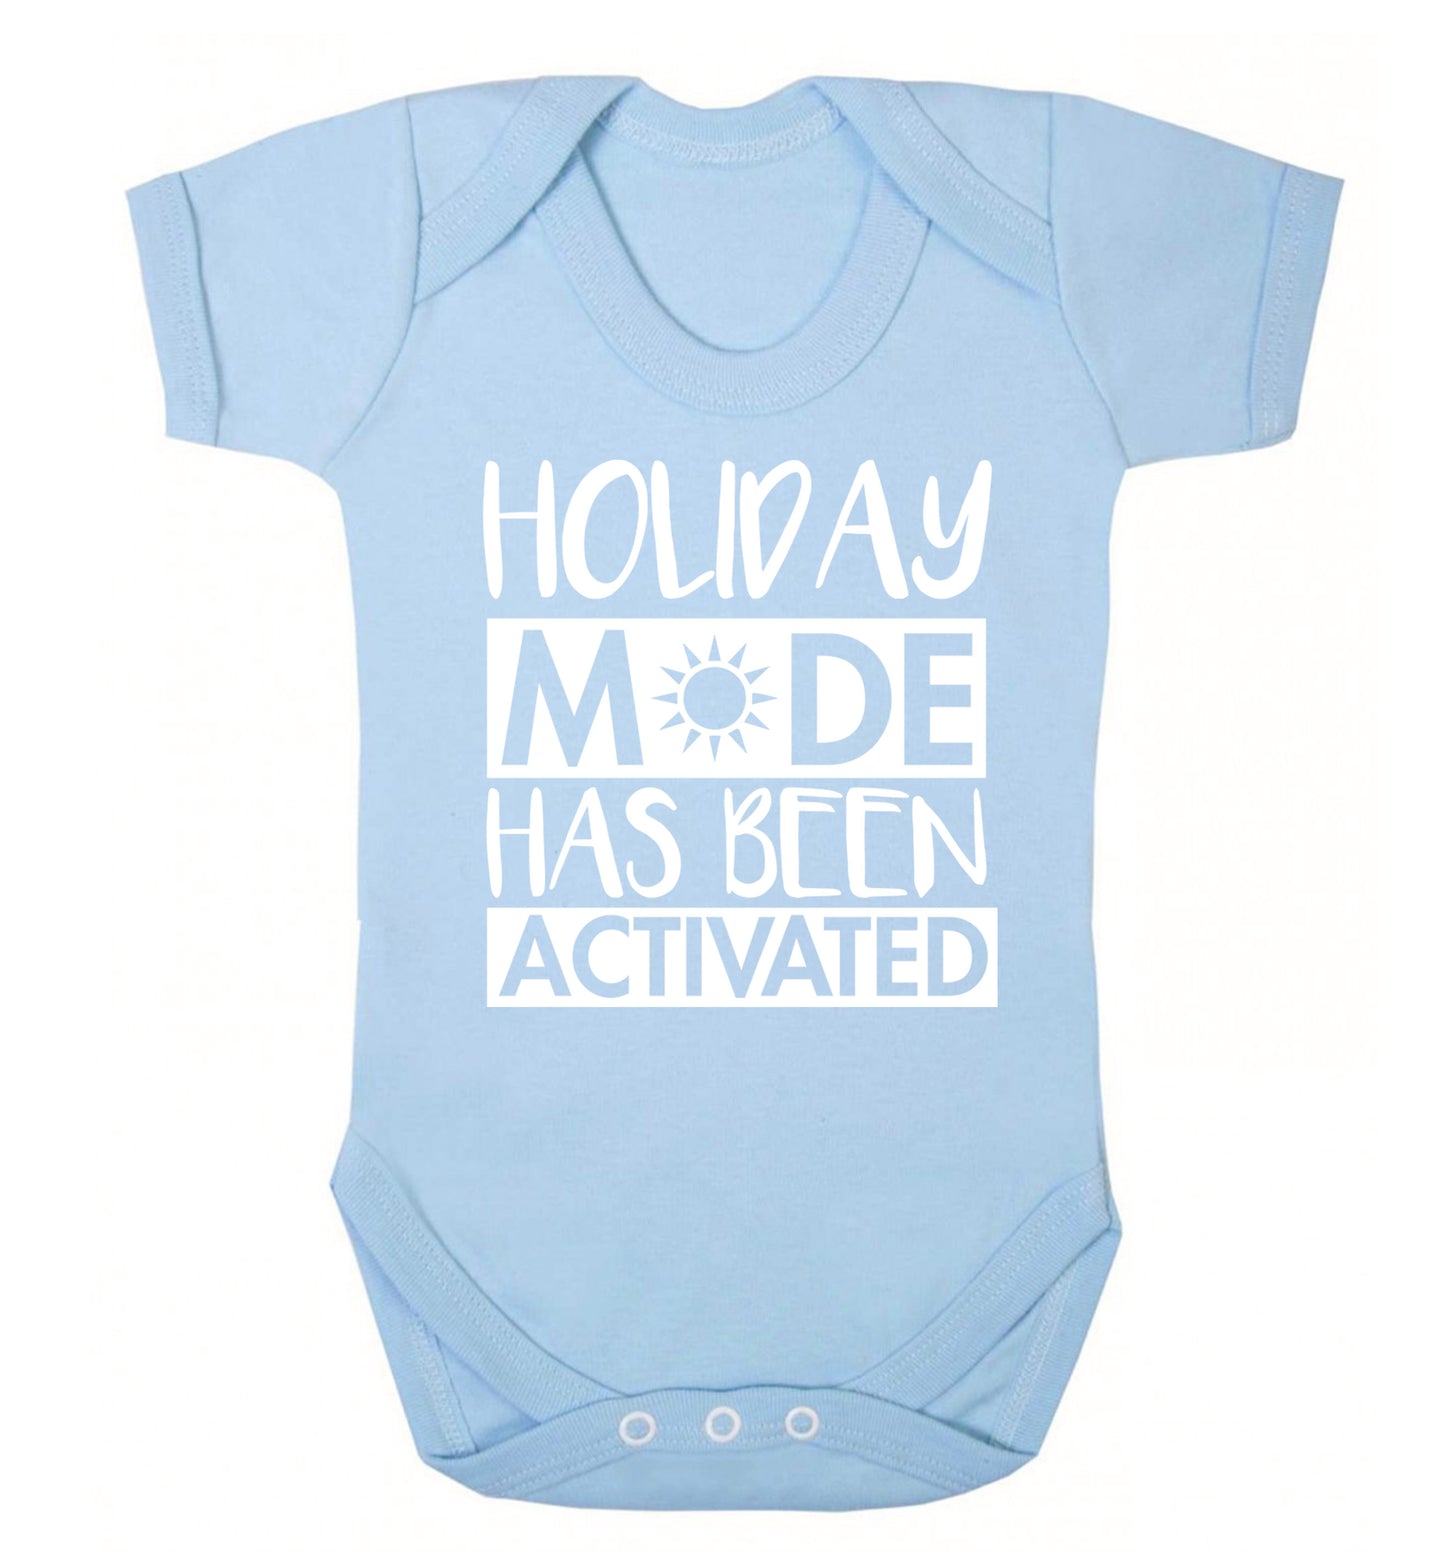 Holiday mode has been activated Baby Vest pale blue 18-24 months